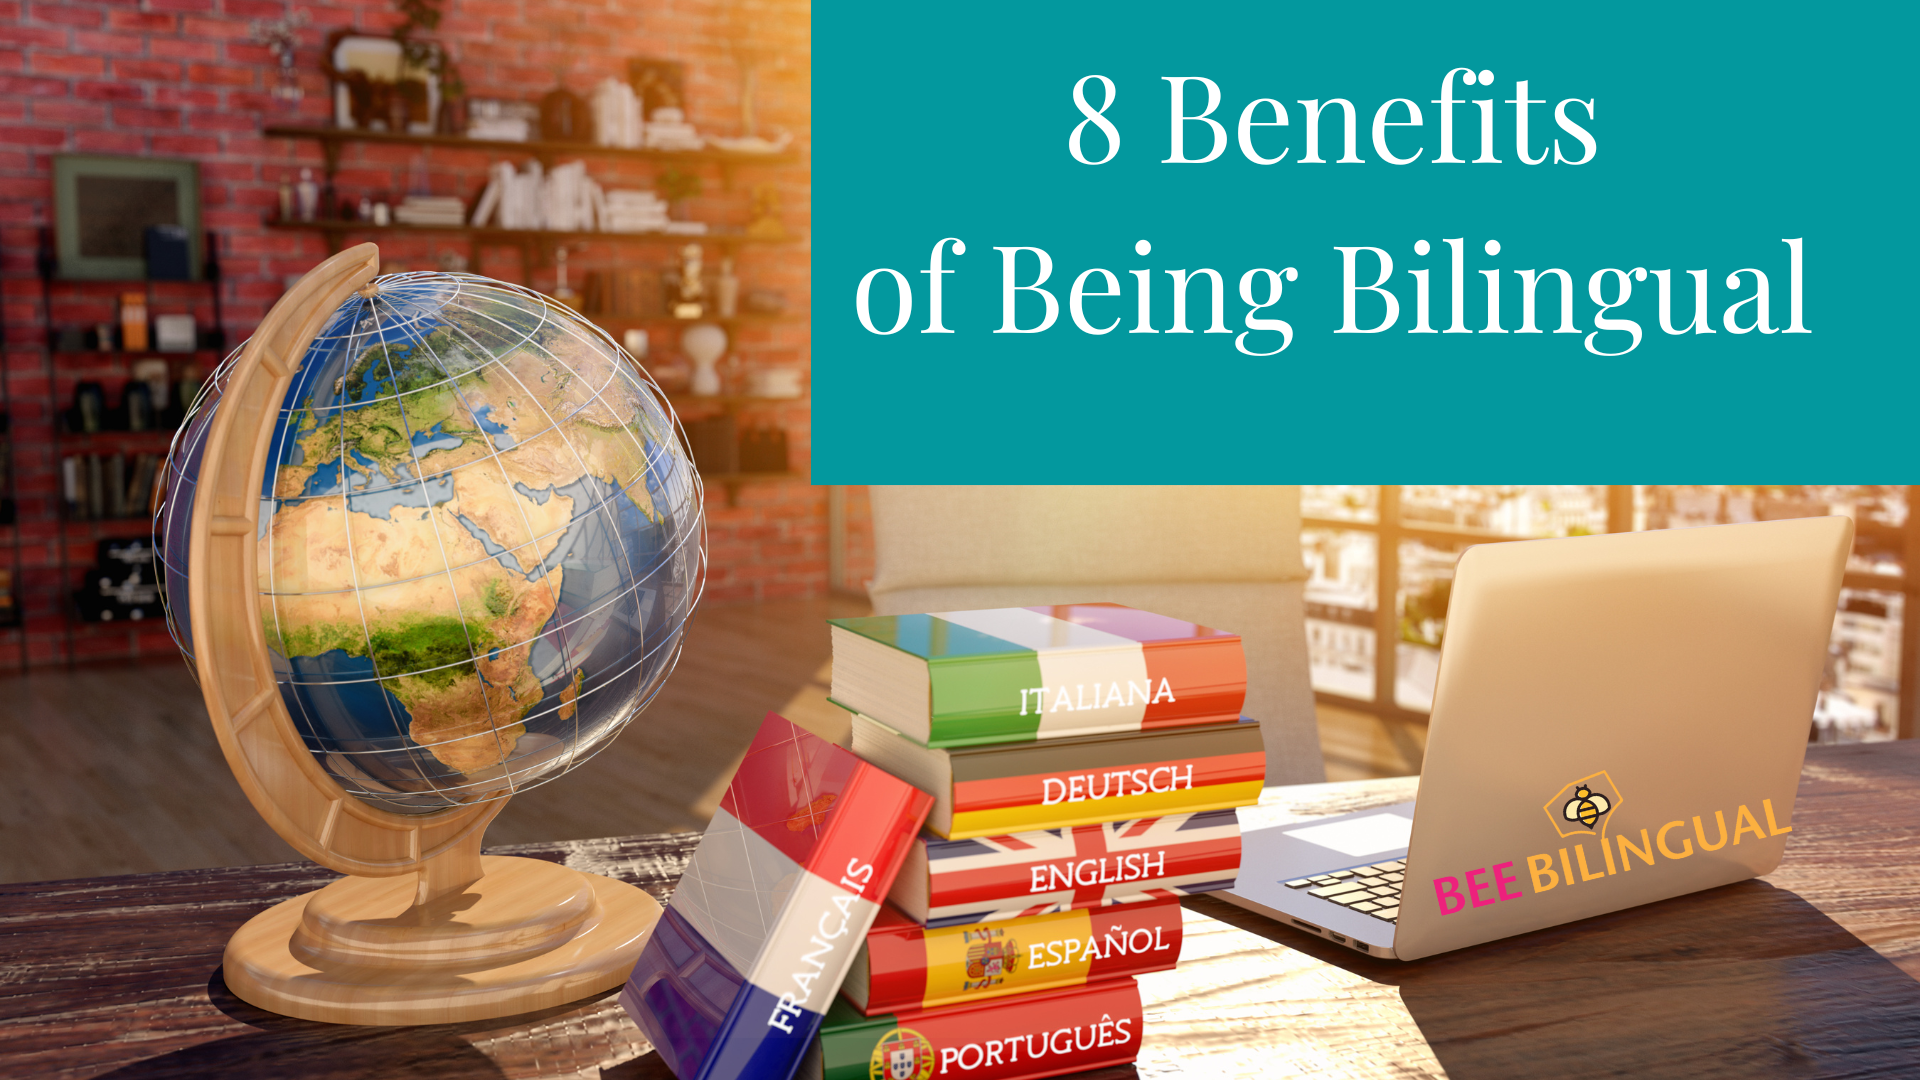 8 Benefits of Being Bilingual